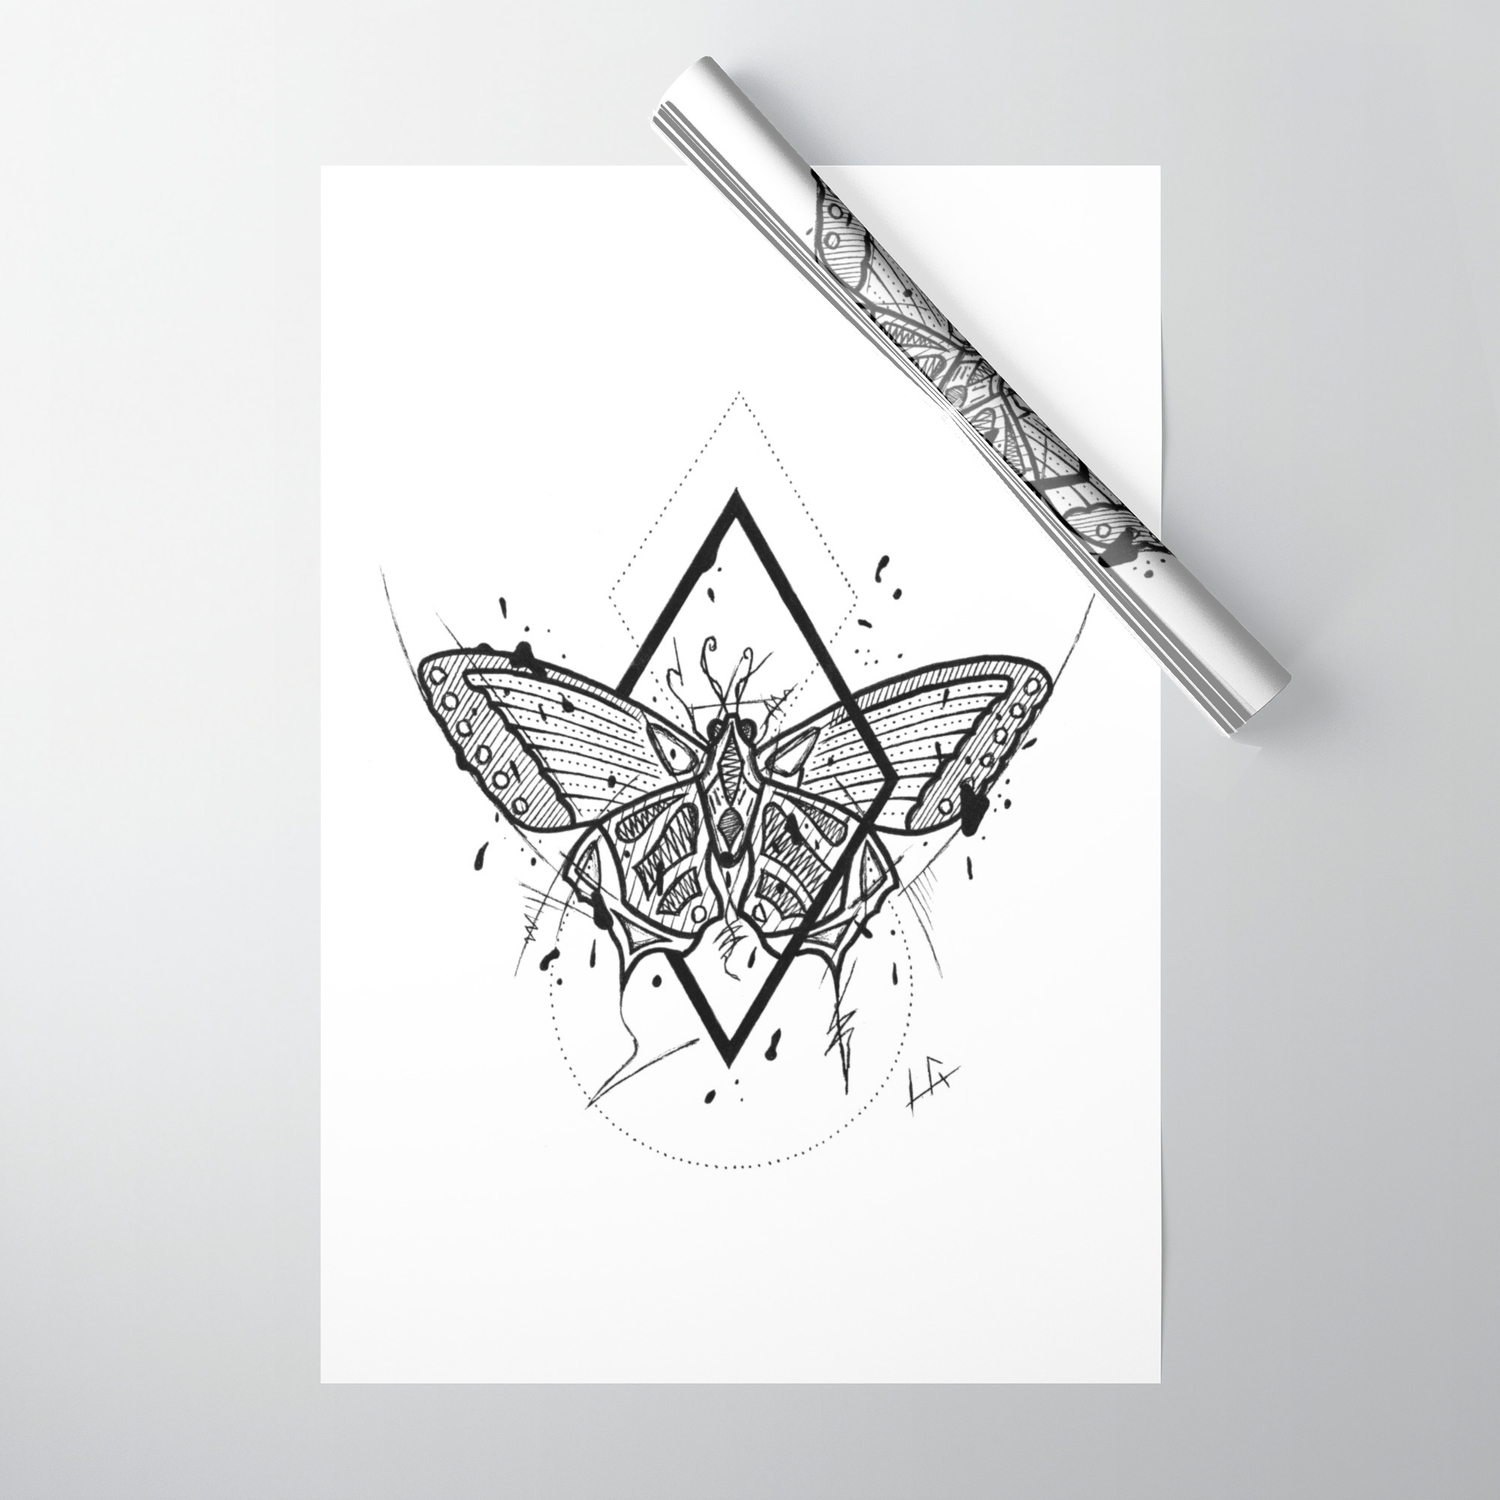 Butterfly Handmade Drawing Made In Pencil And Ink Tattoo Sketch Tattoo Flash Blackwork Wrapping Paper By Lucagenart